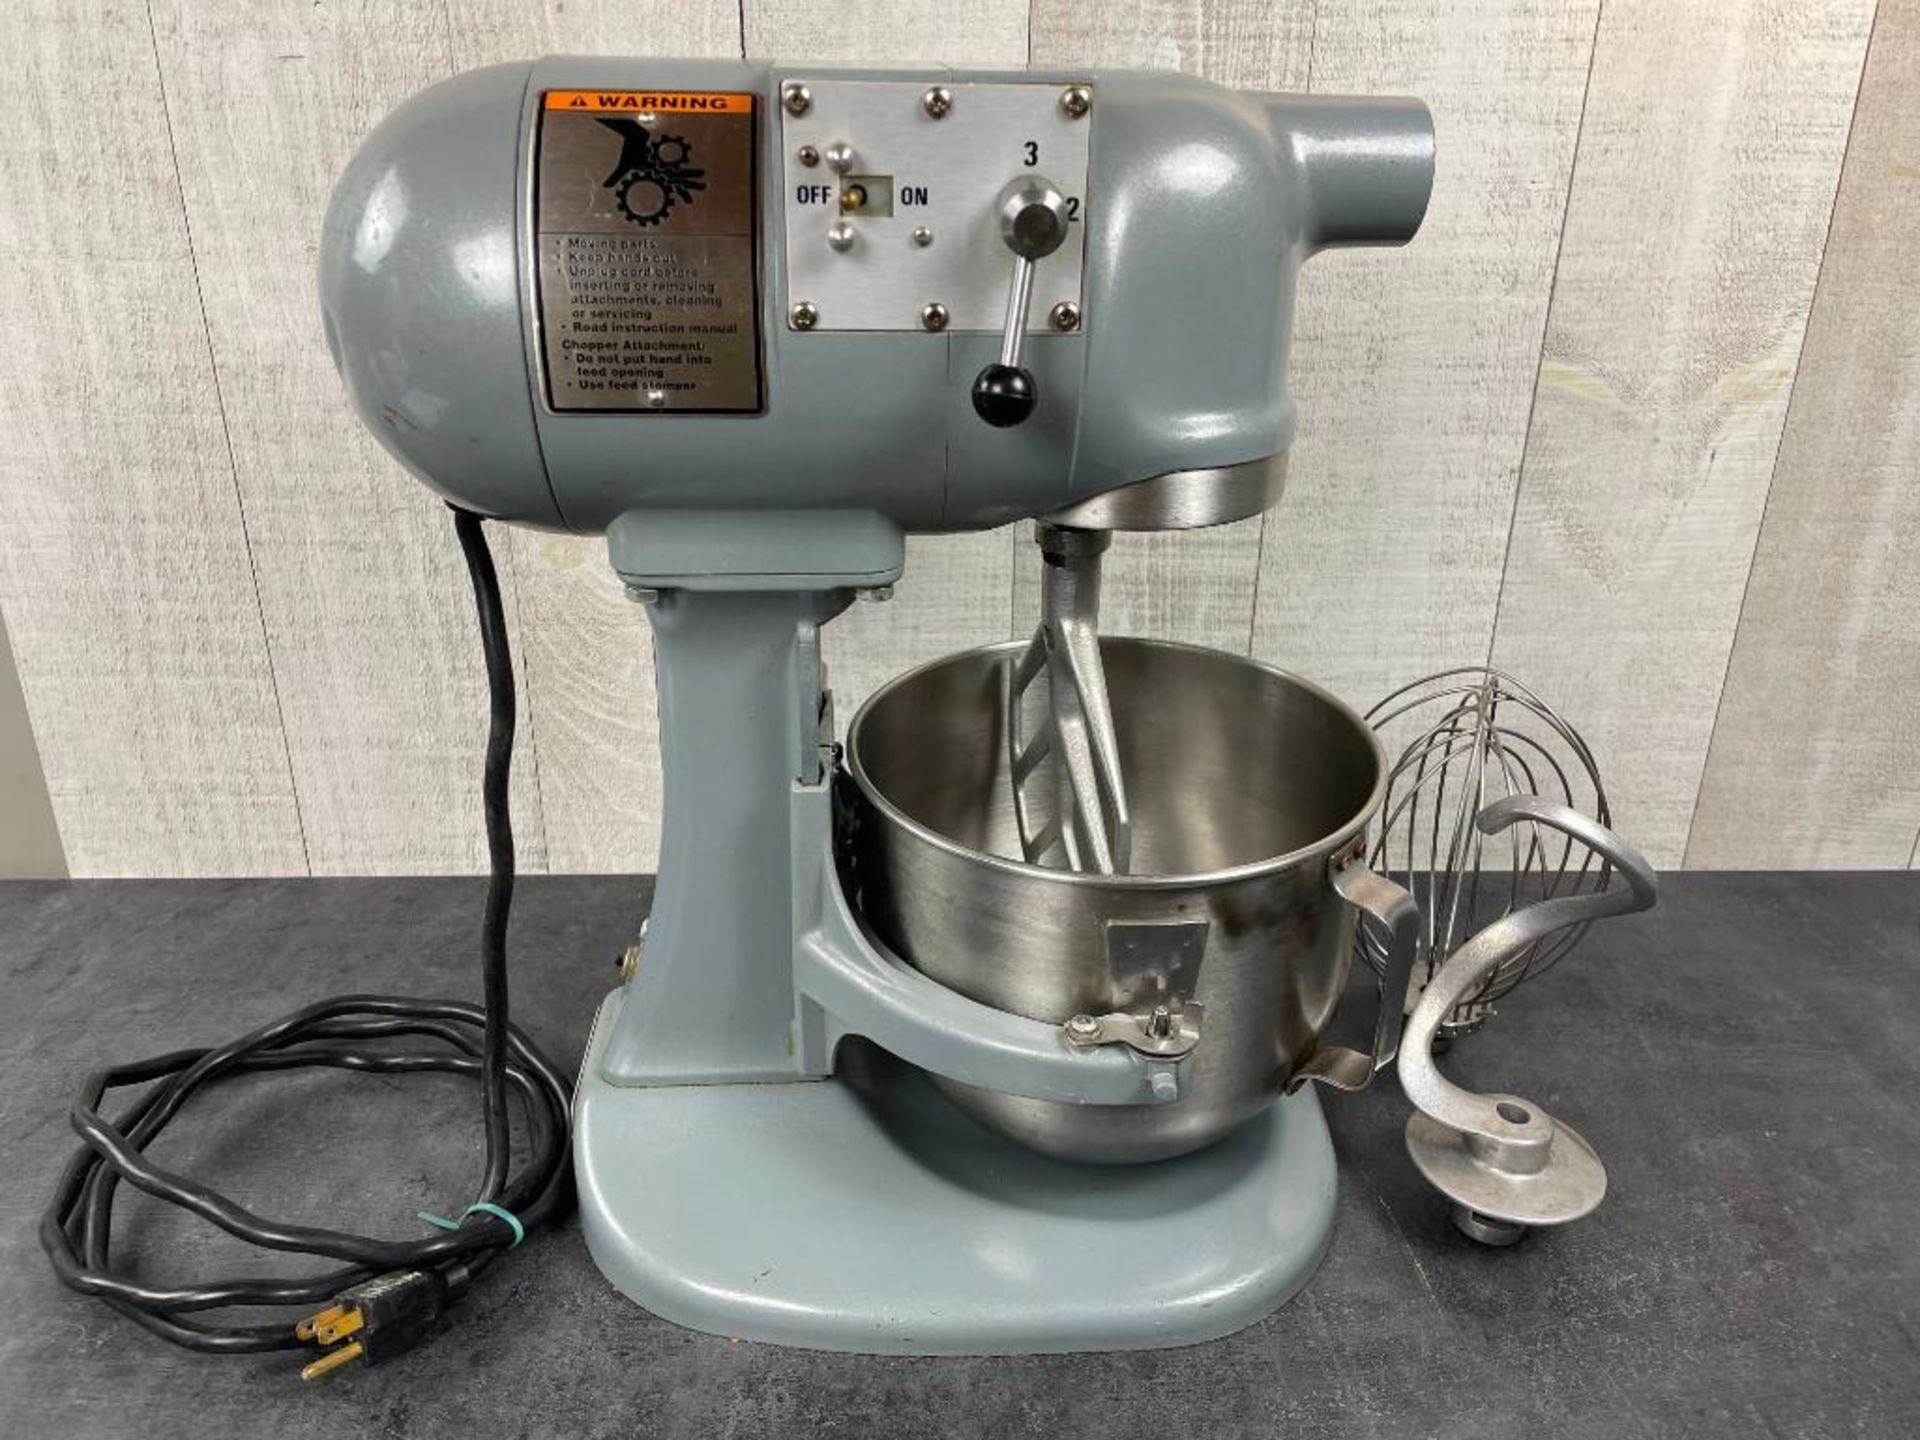 HOBART N50 5QT MIXER WITH HOOK, WHIP, PADDLE - Image 4 of 9